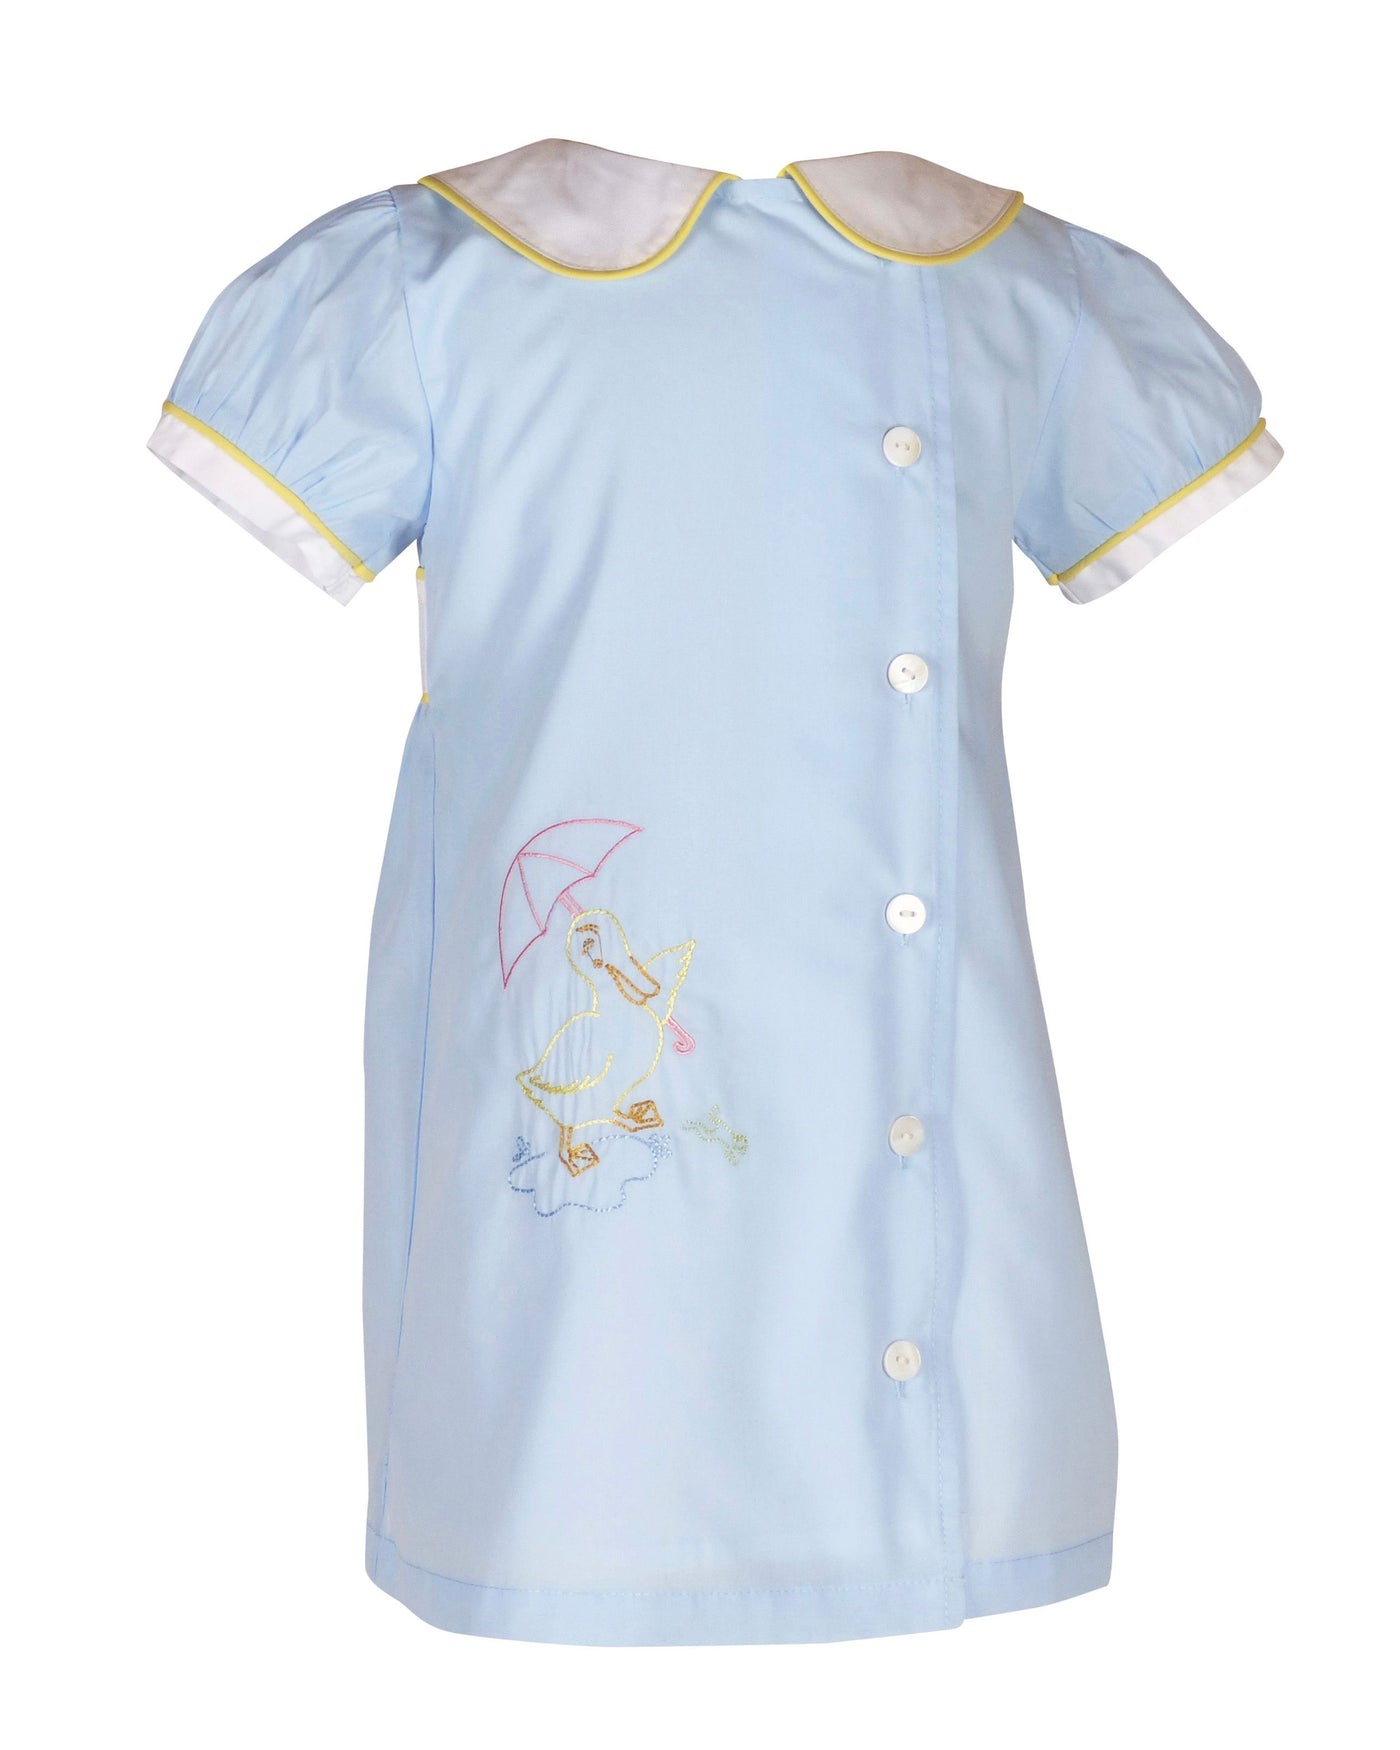 Avery Dress with Puddle Duck Embroidery - Mumzie's Children